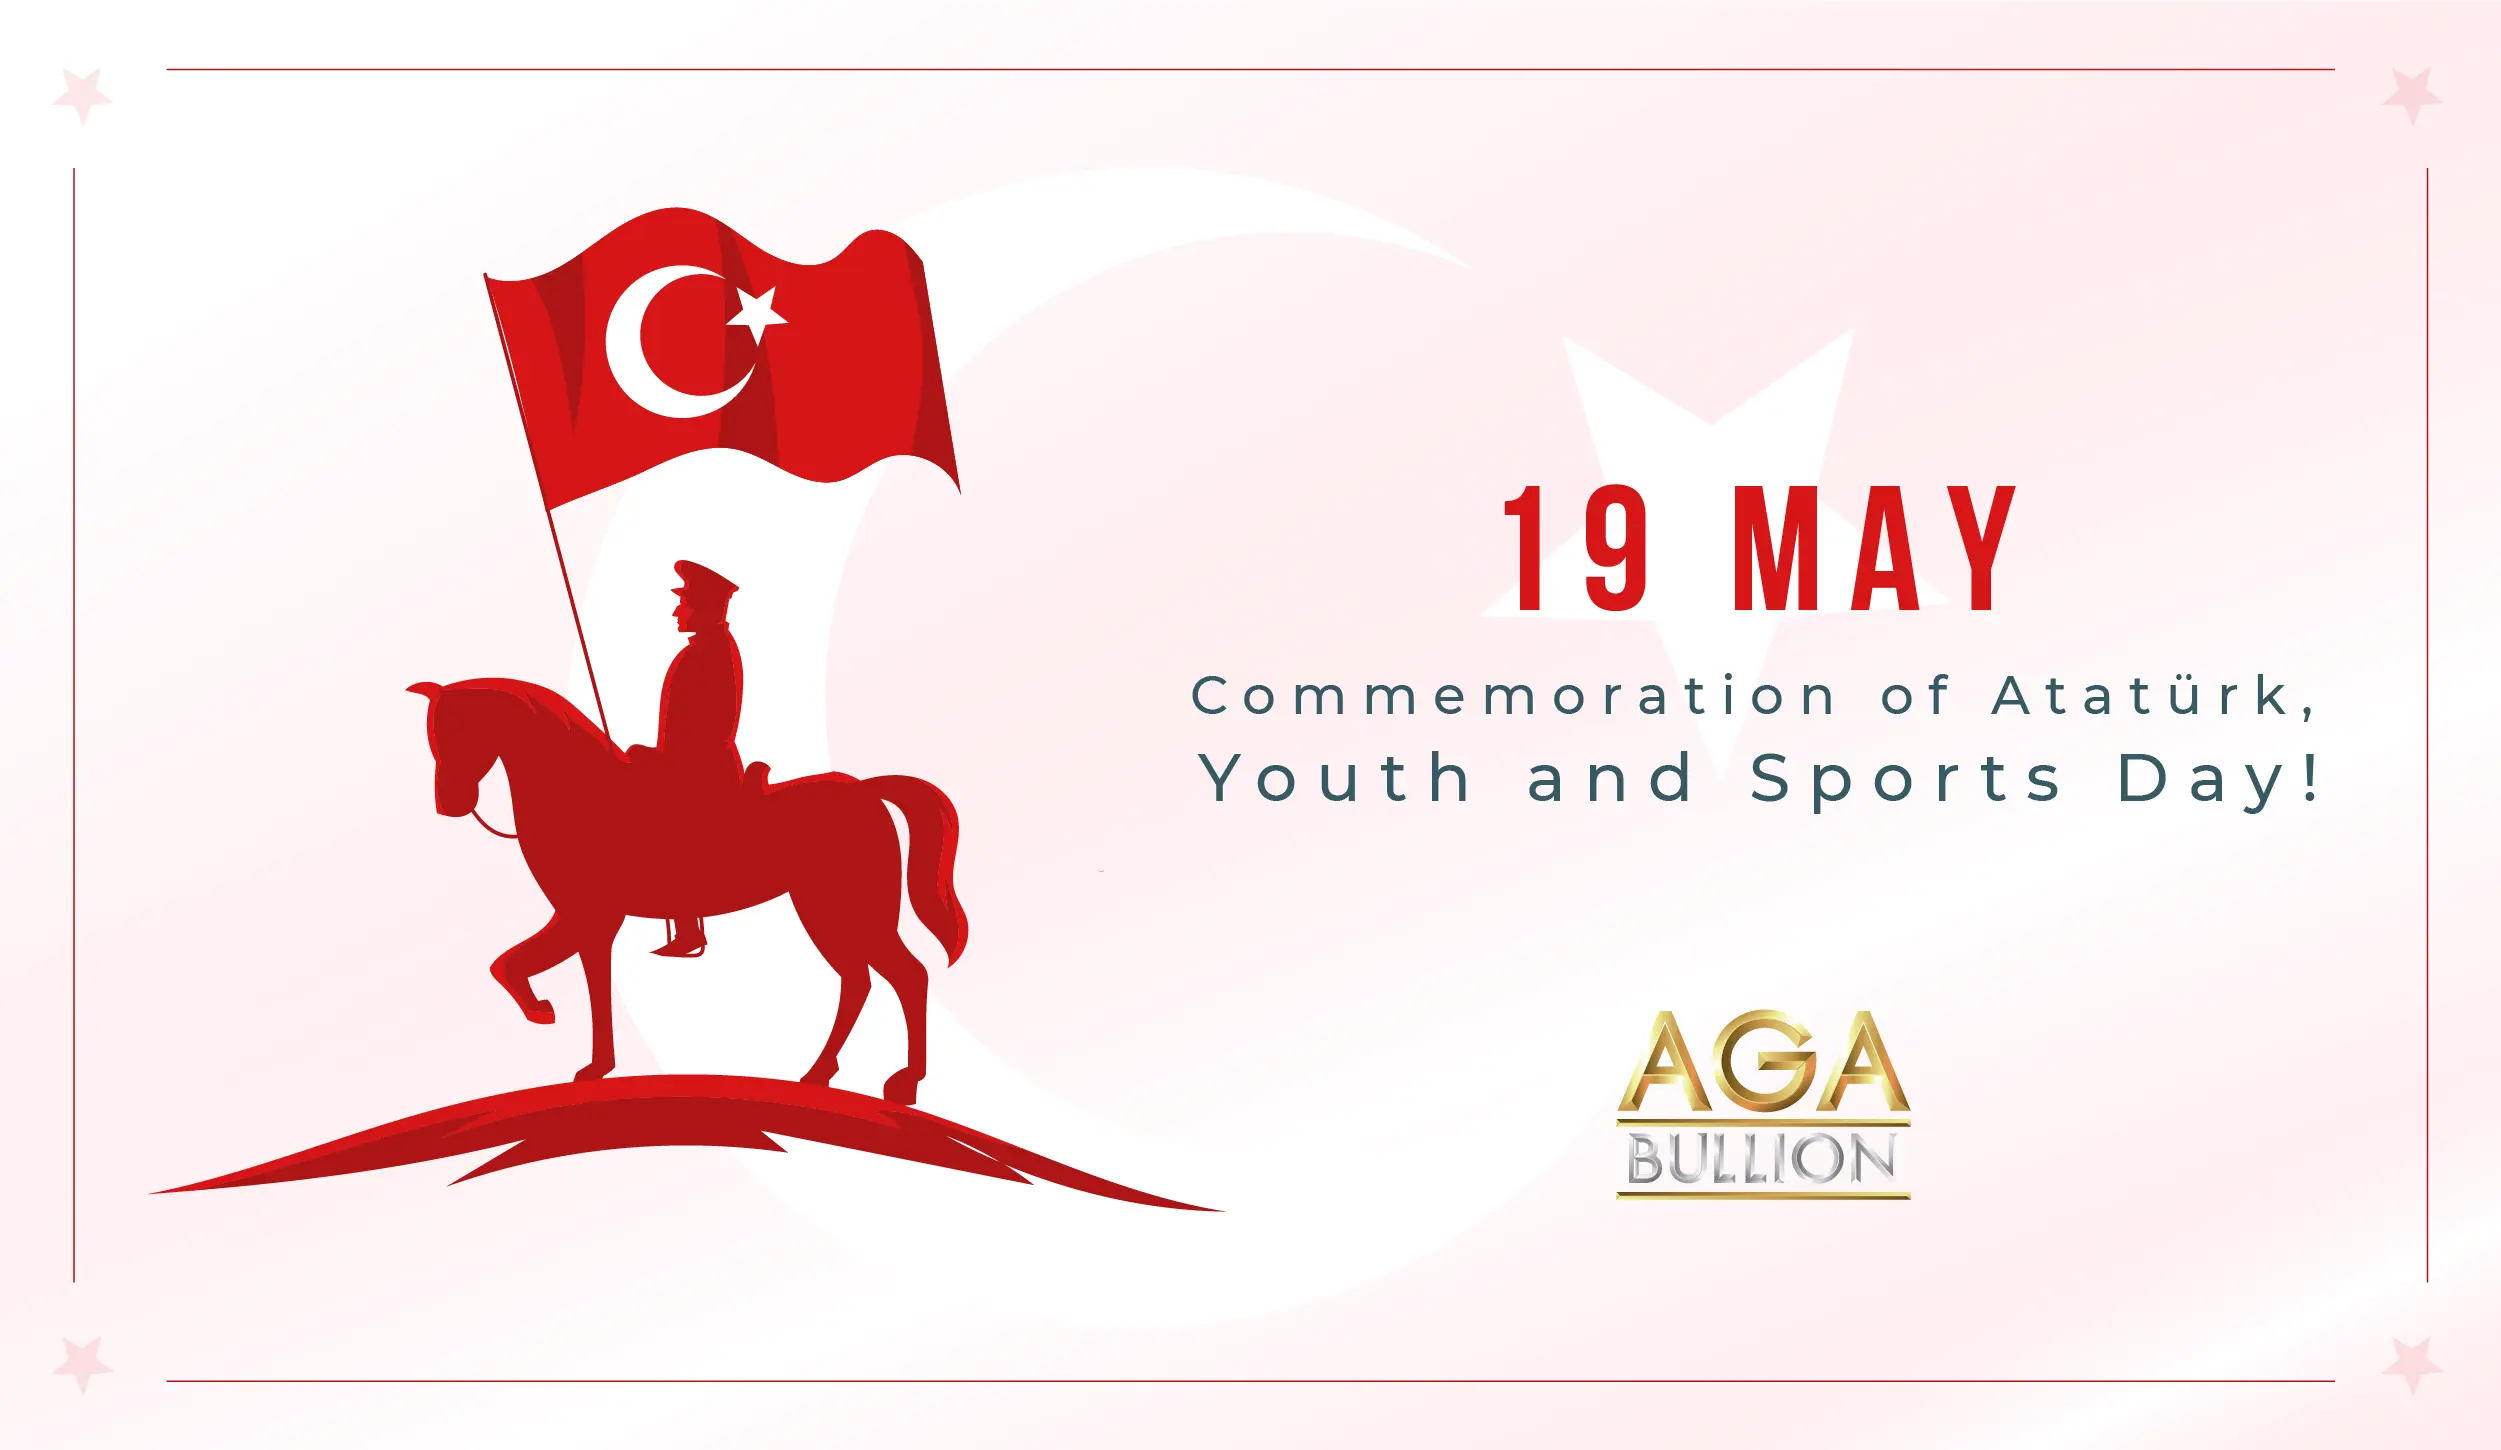 Happy Commemoration of Atatürk, Youth and Sports Day!